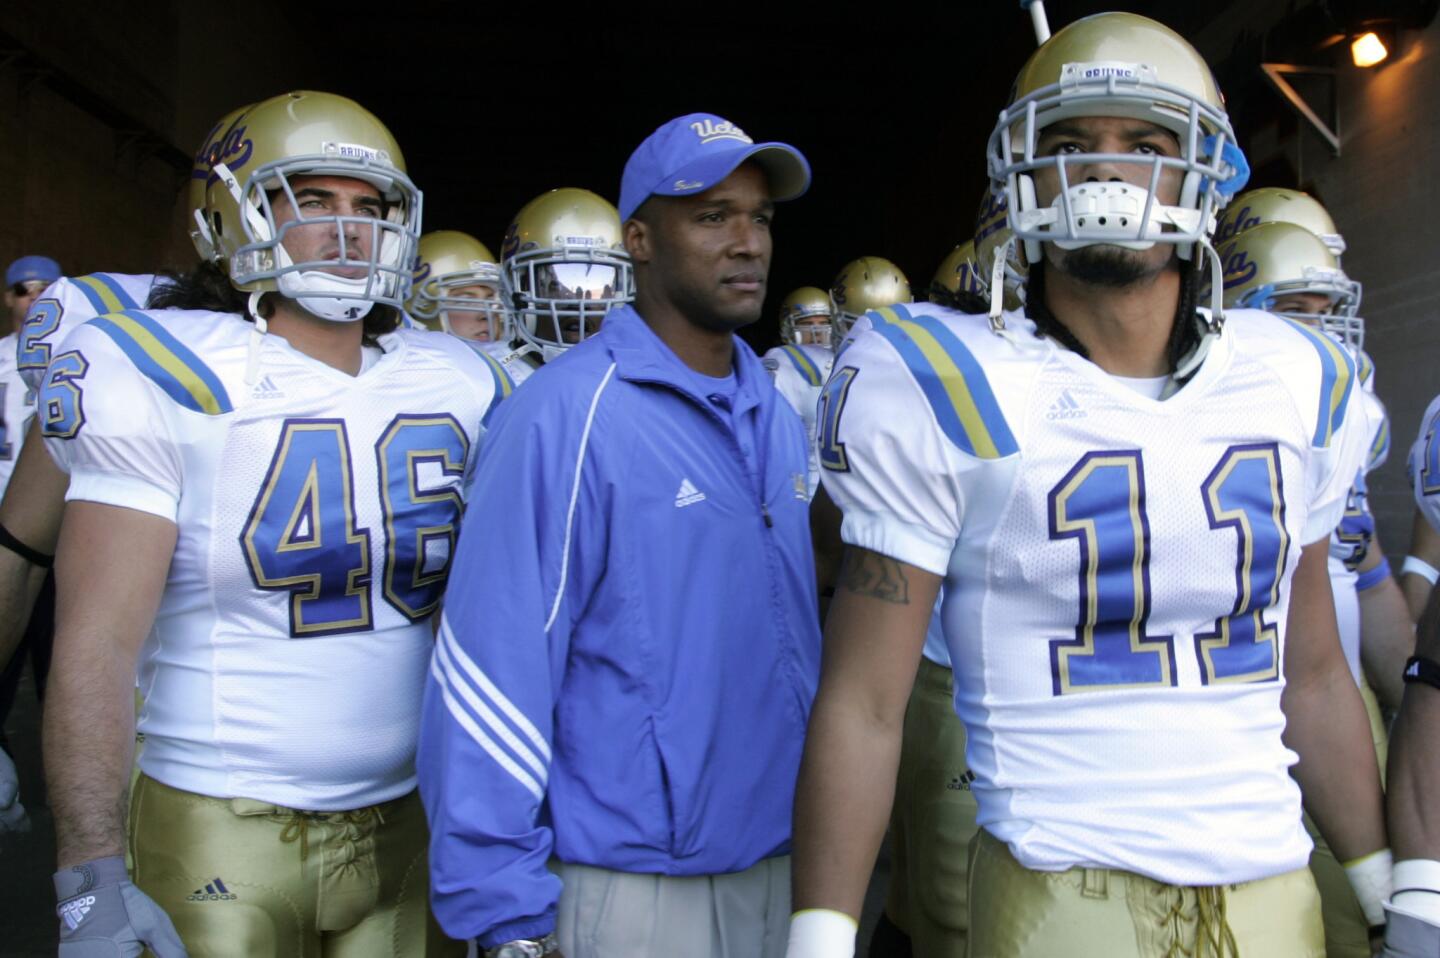 UCLA Coach Karl Dorrell comes out of the tunnel at the Coliseum with Chad Moline and Dennis Keyes to play the Trojans on Dec. 1, 2007.